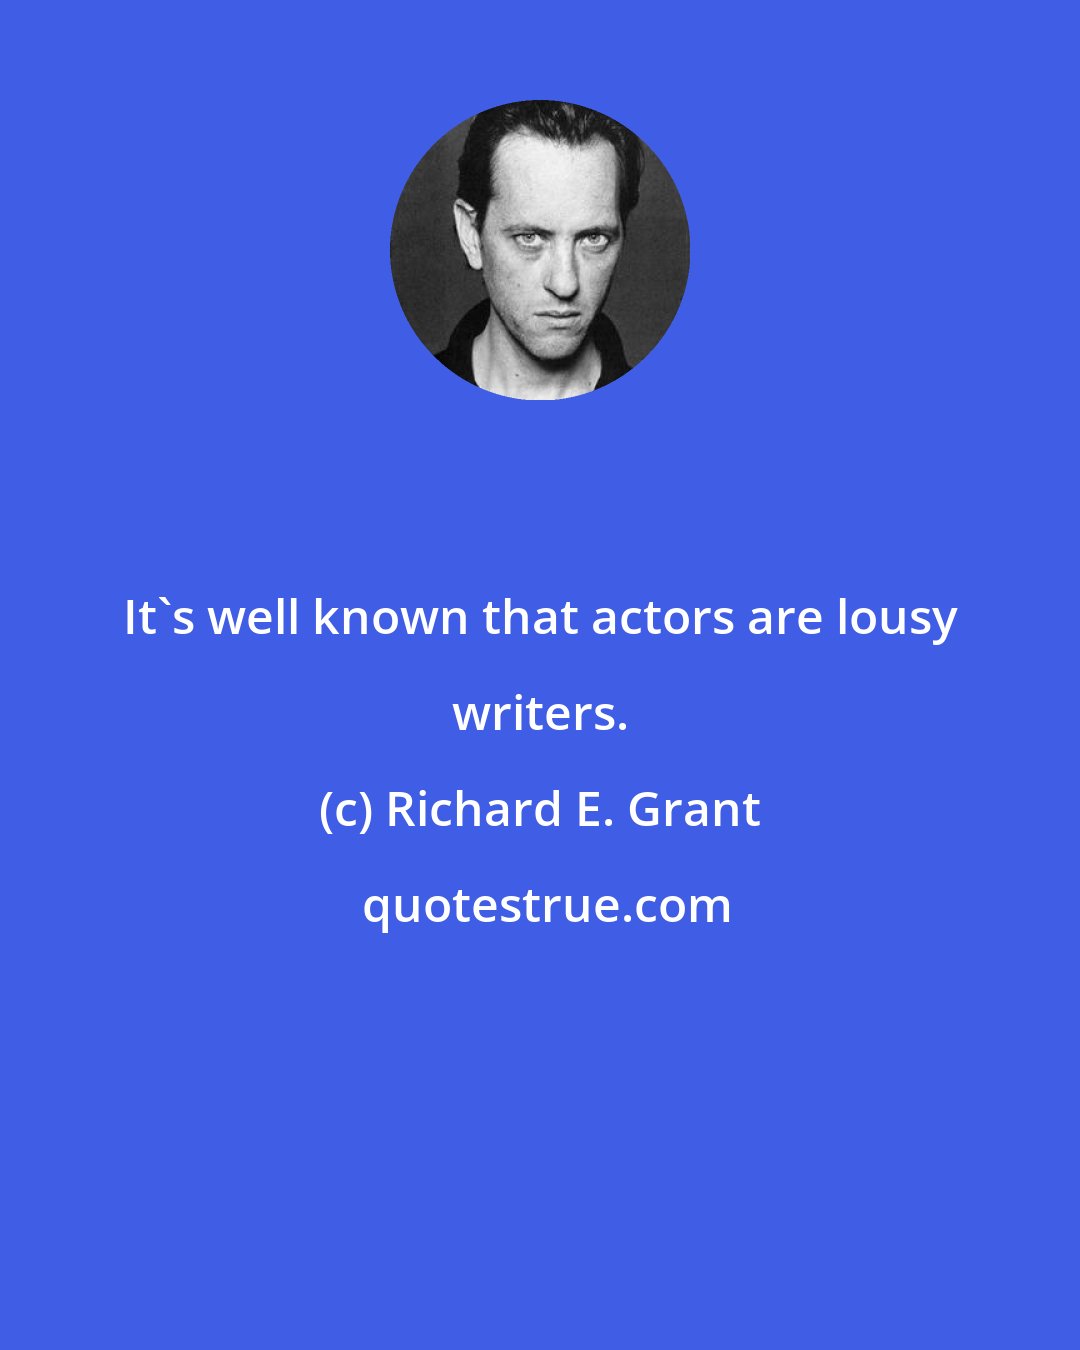 Richard E. Grant: It's well known that actors are lousy writers.